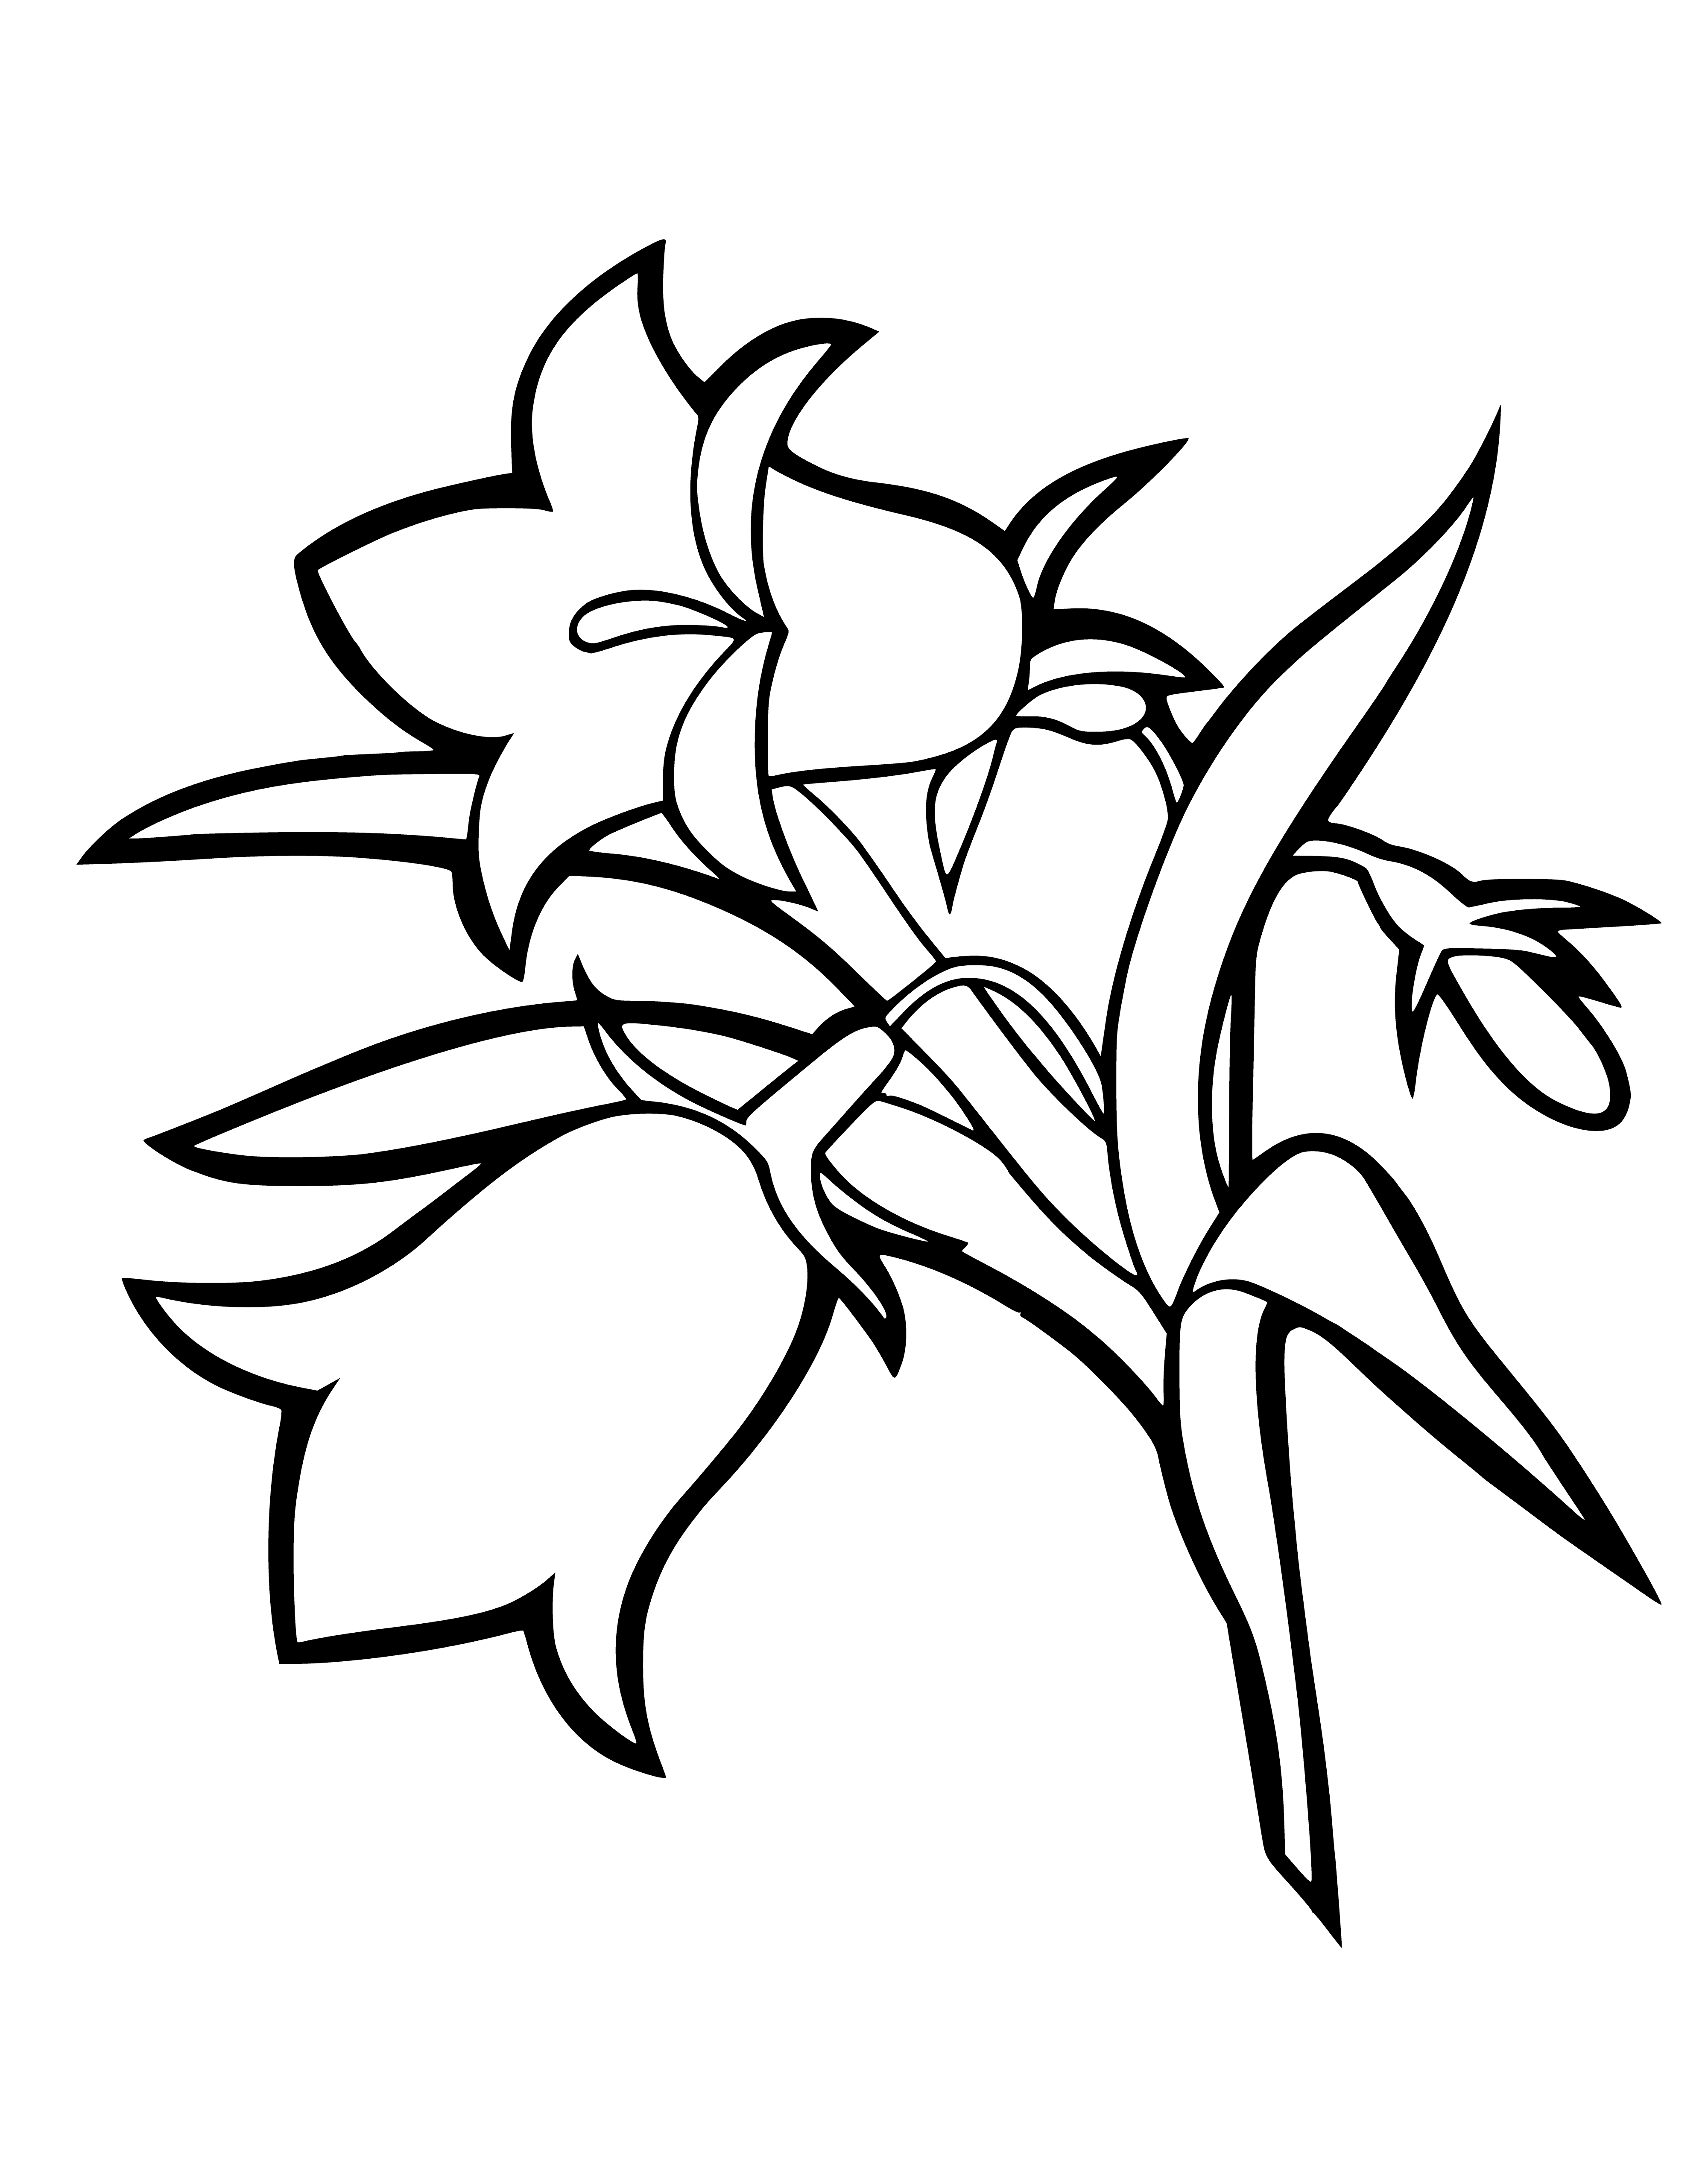 coloring page: Pretty light pink flower has curved petals & yellow center, on a long green stem with leaves.